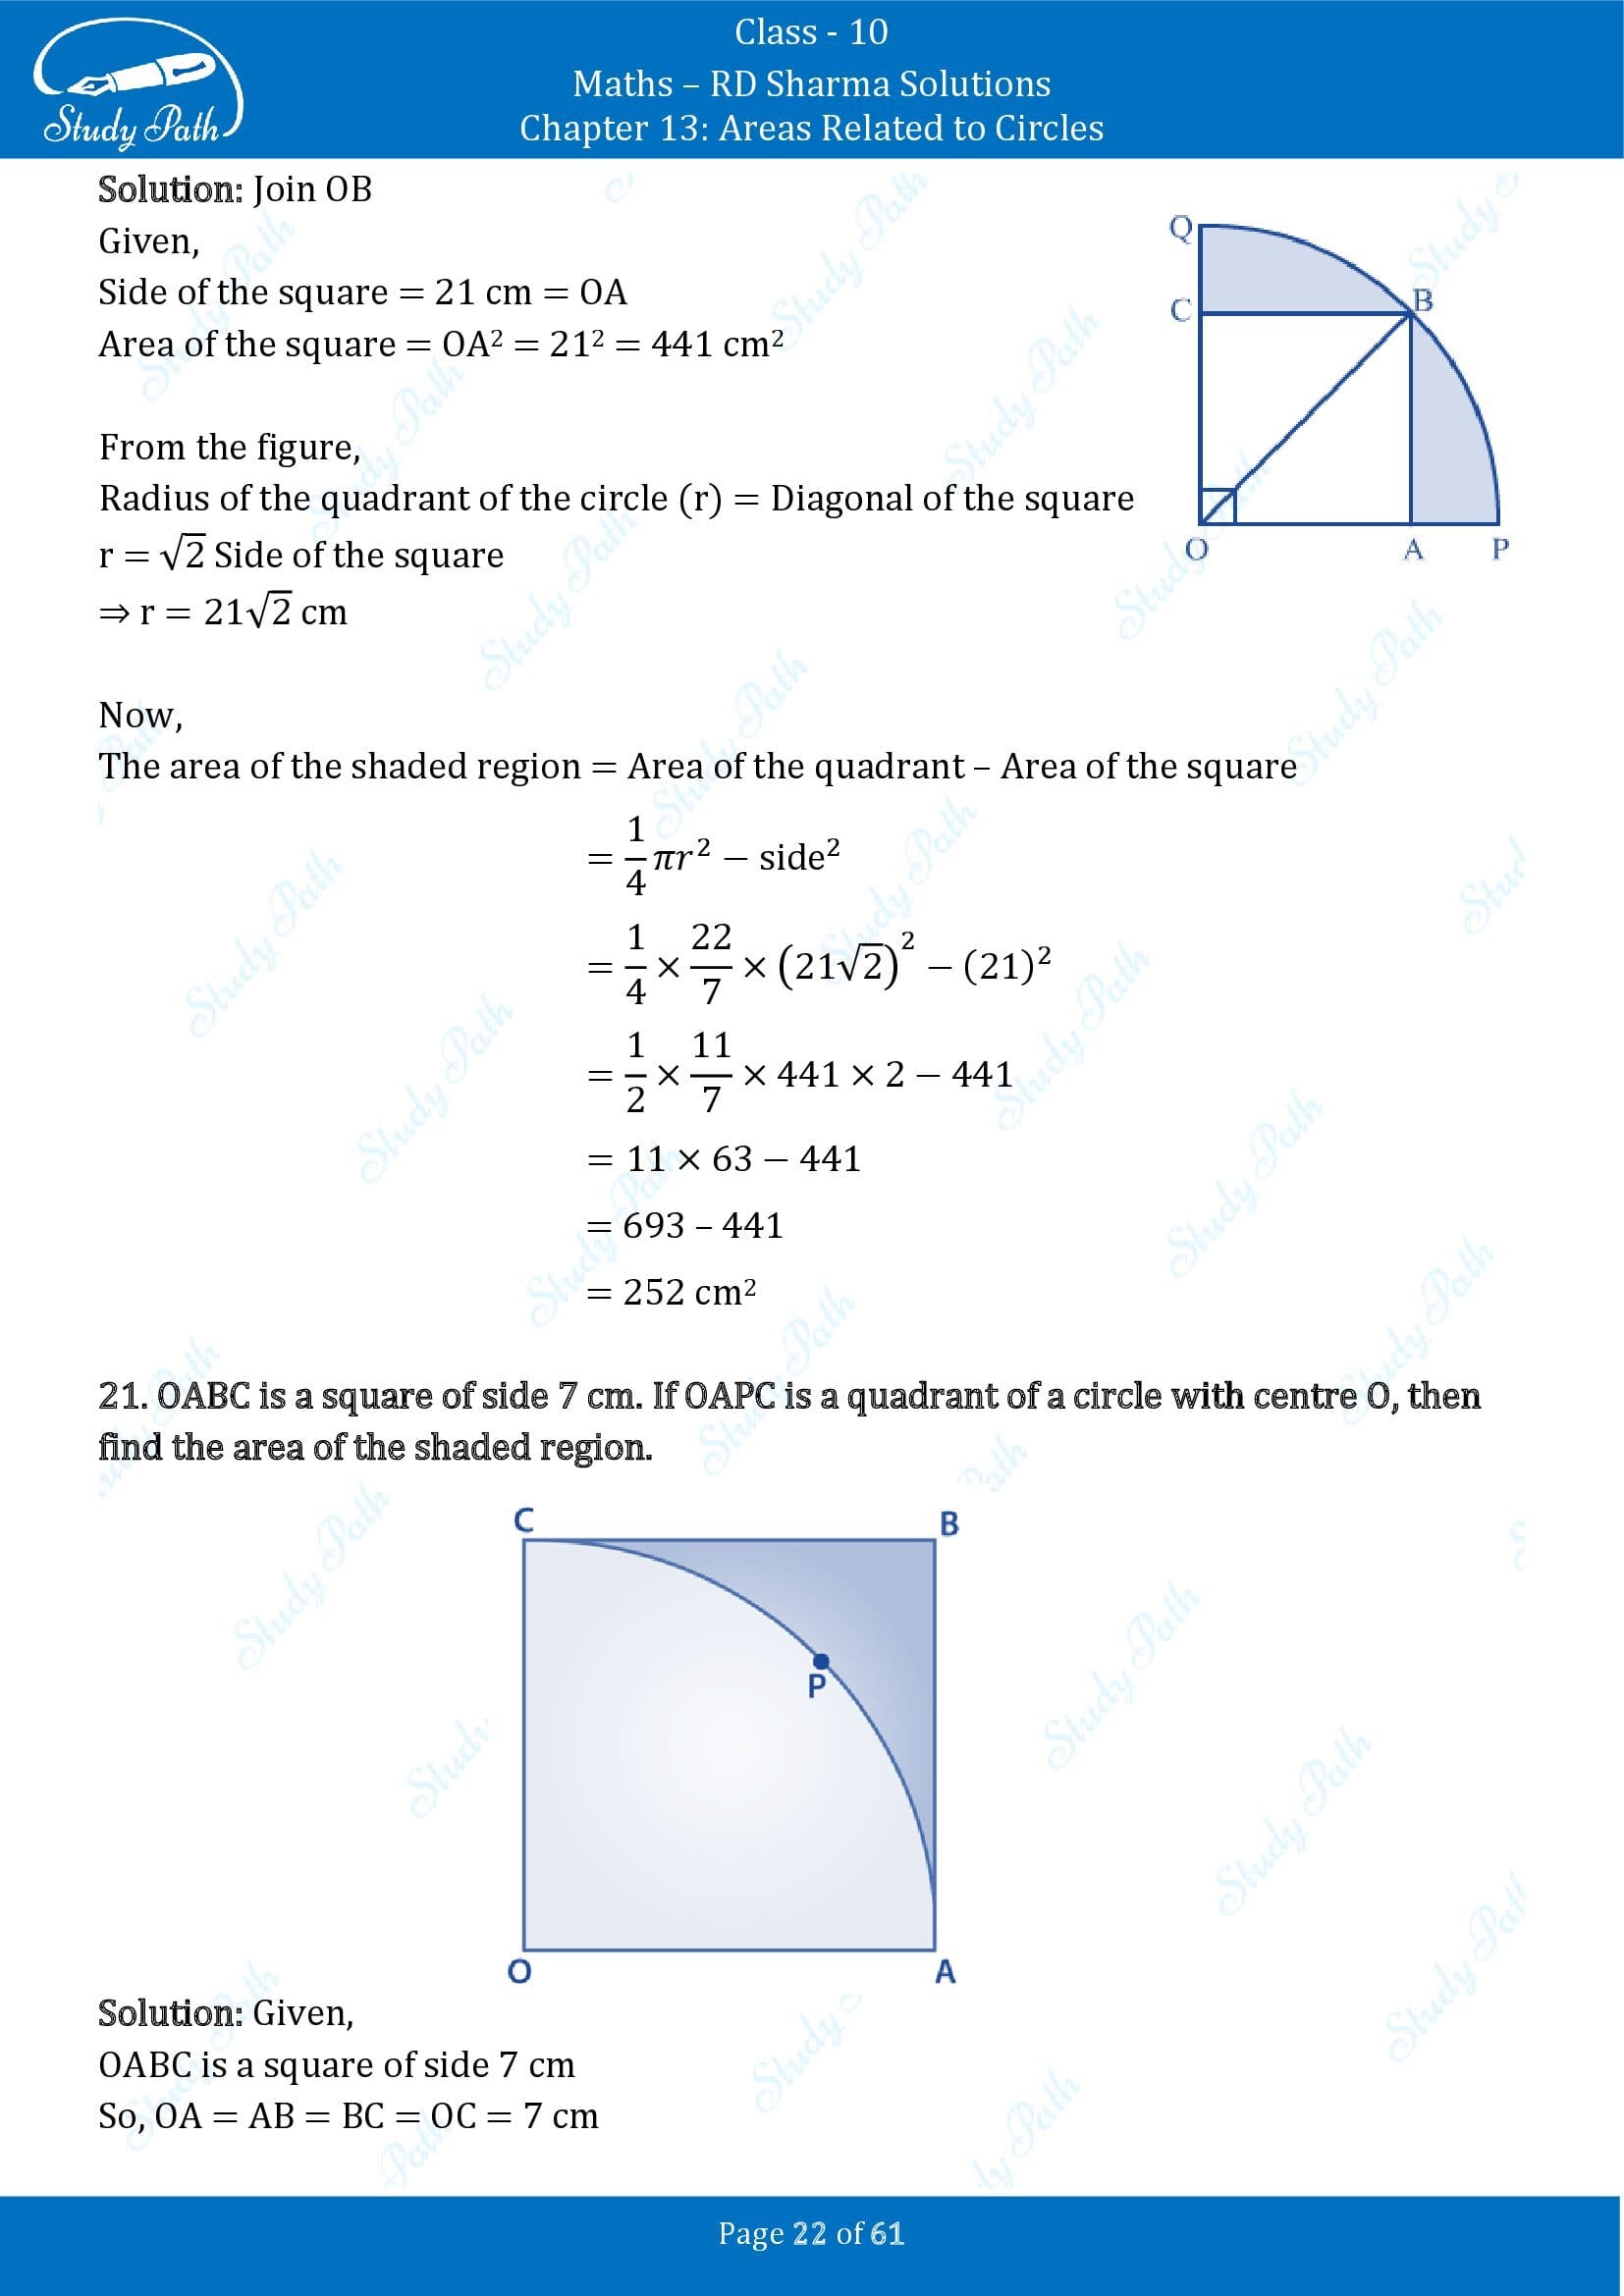 RD Sharma Solutions Class 10 Chapter 13 Areas Related to Circles Exercise 13.4 00022